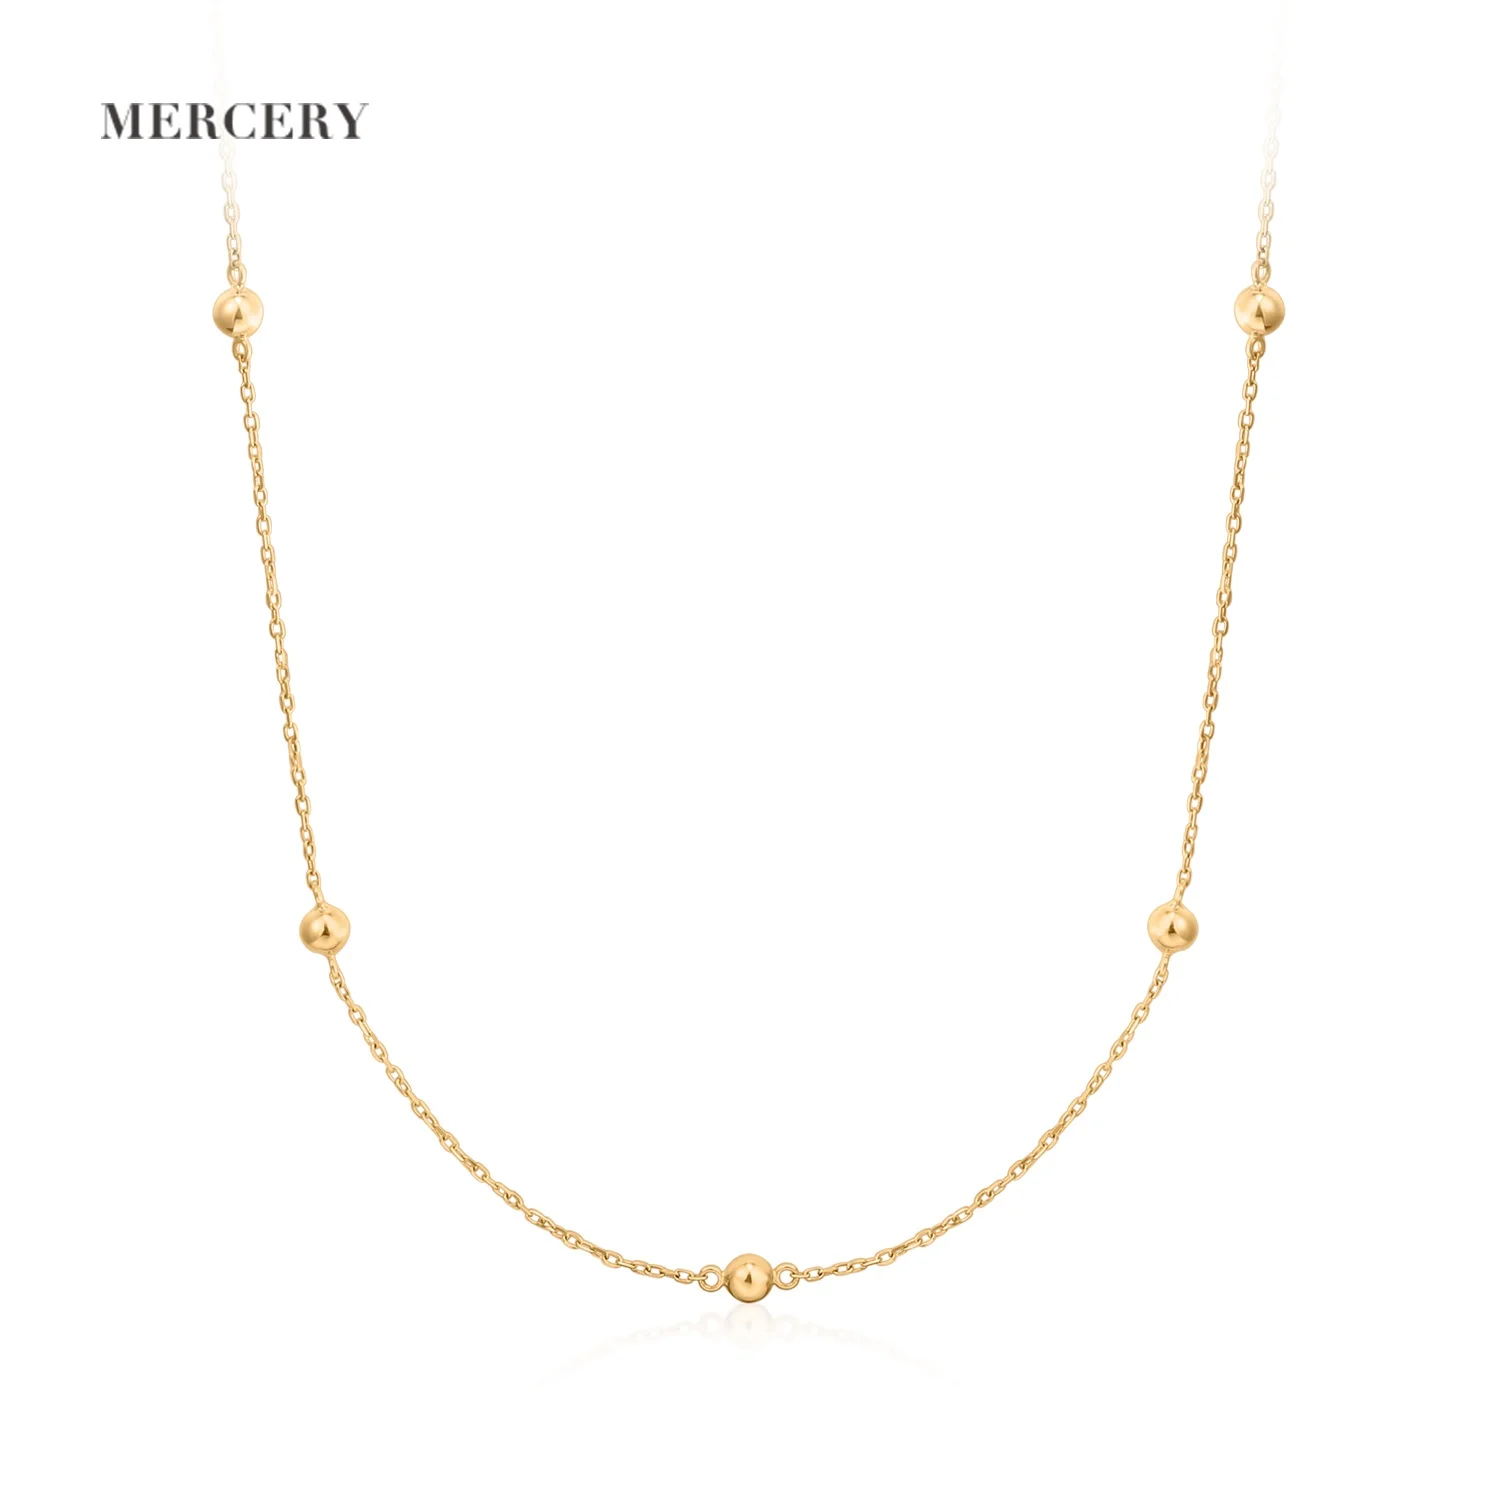 

Mercery Dainty Orb Round Bead Pendant Layered Orbit Golden Ball 14k Solid Gold Fine Jewelry Necklace For Women